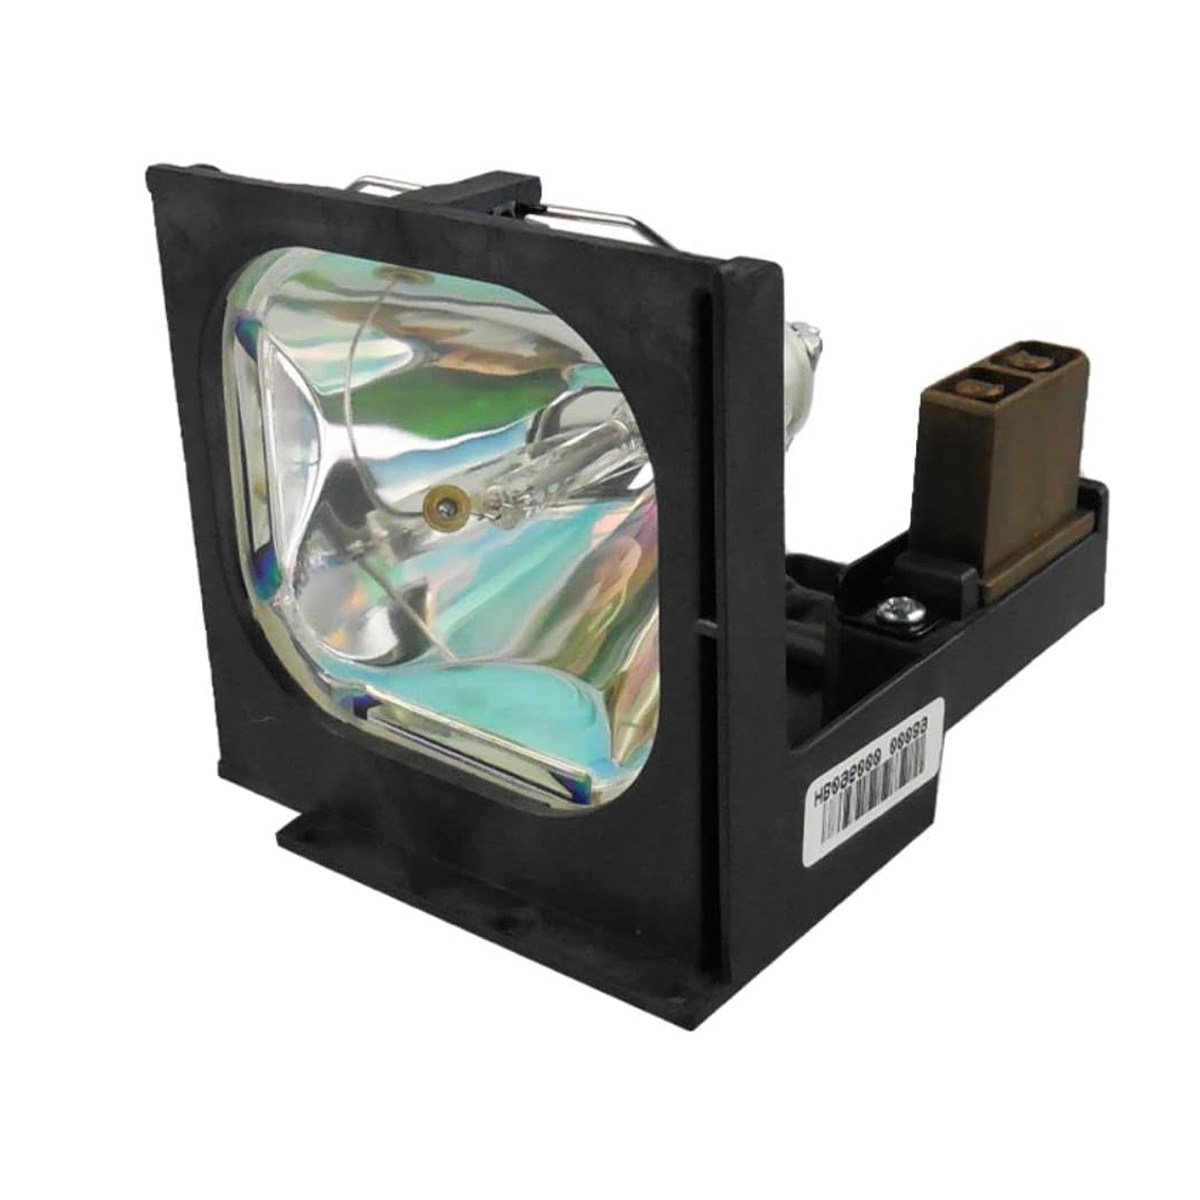 Replacement Projector lamp LV-LP01/6568A001AA For Canon Projector